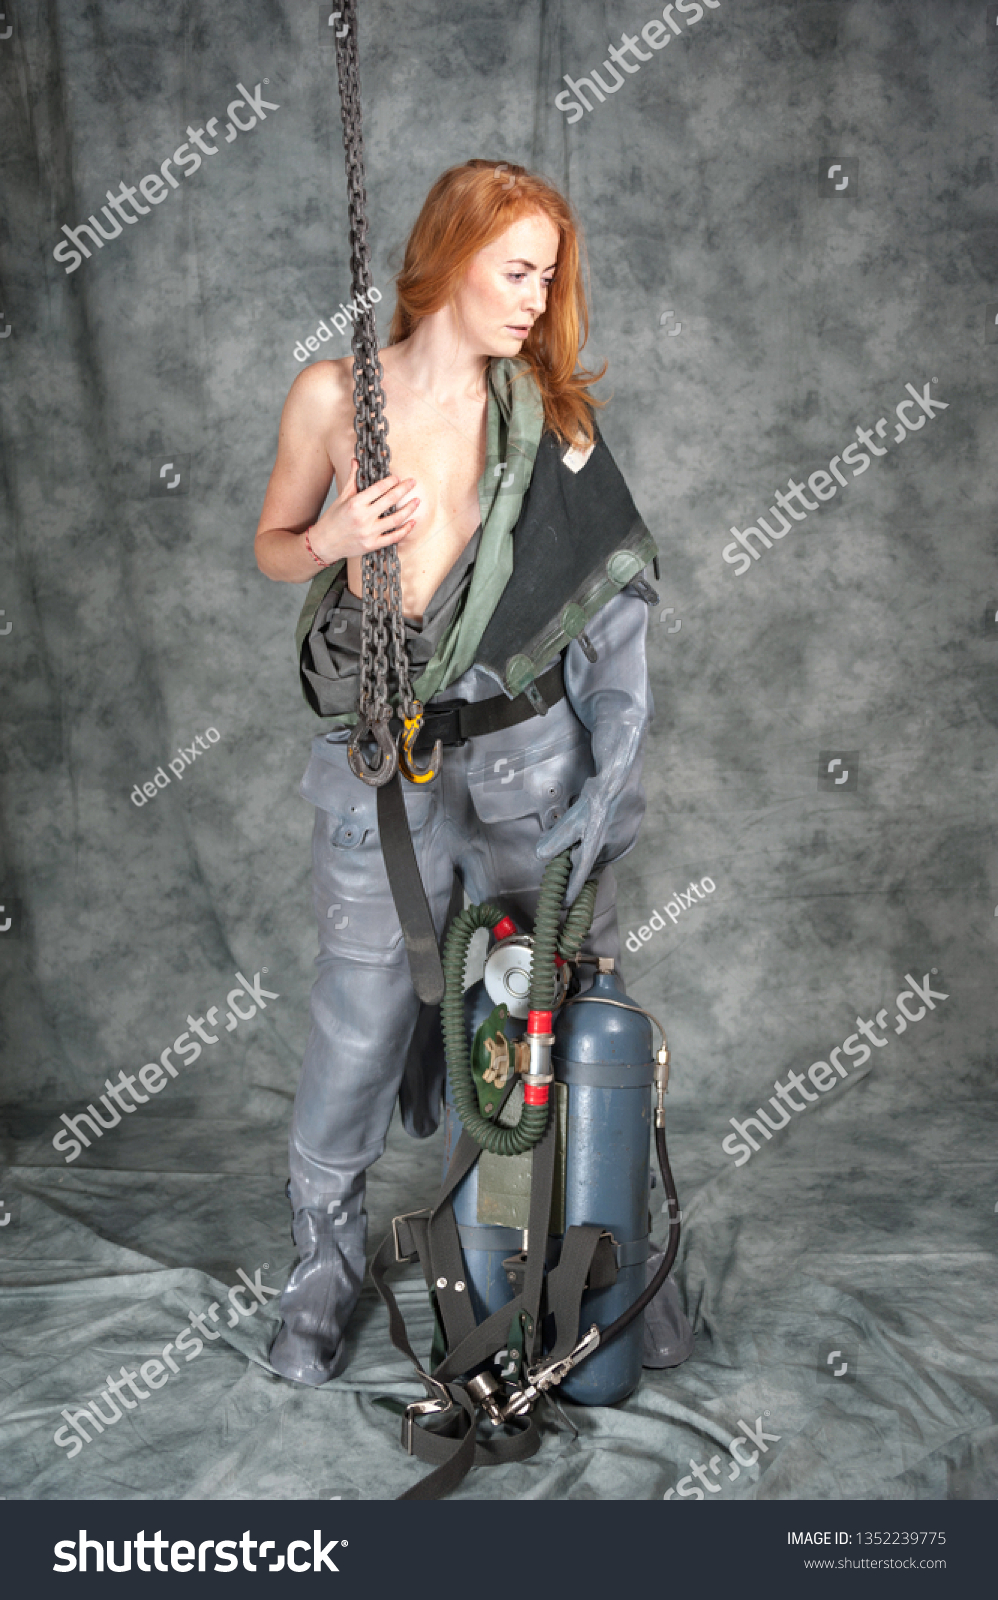 Nude young woman with red hair and freckles with a chain in her hands in a vintage diving suit. #1352239775